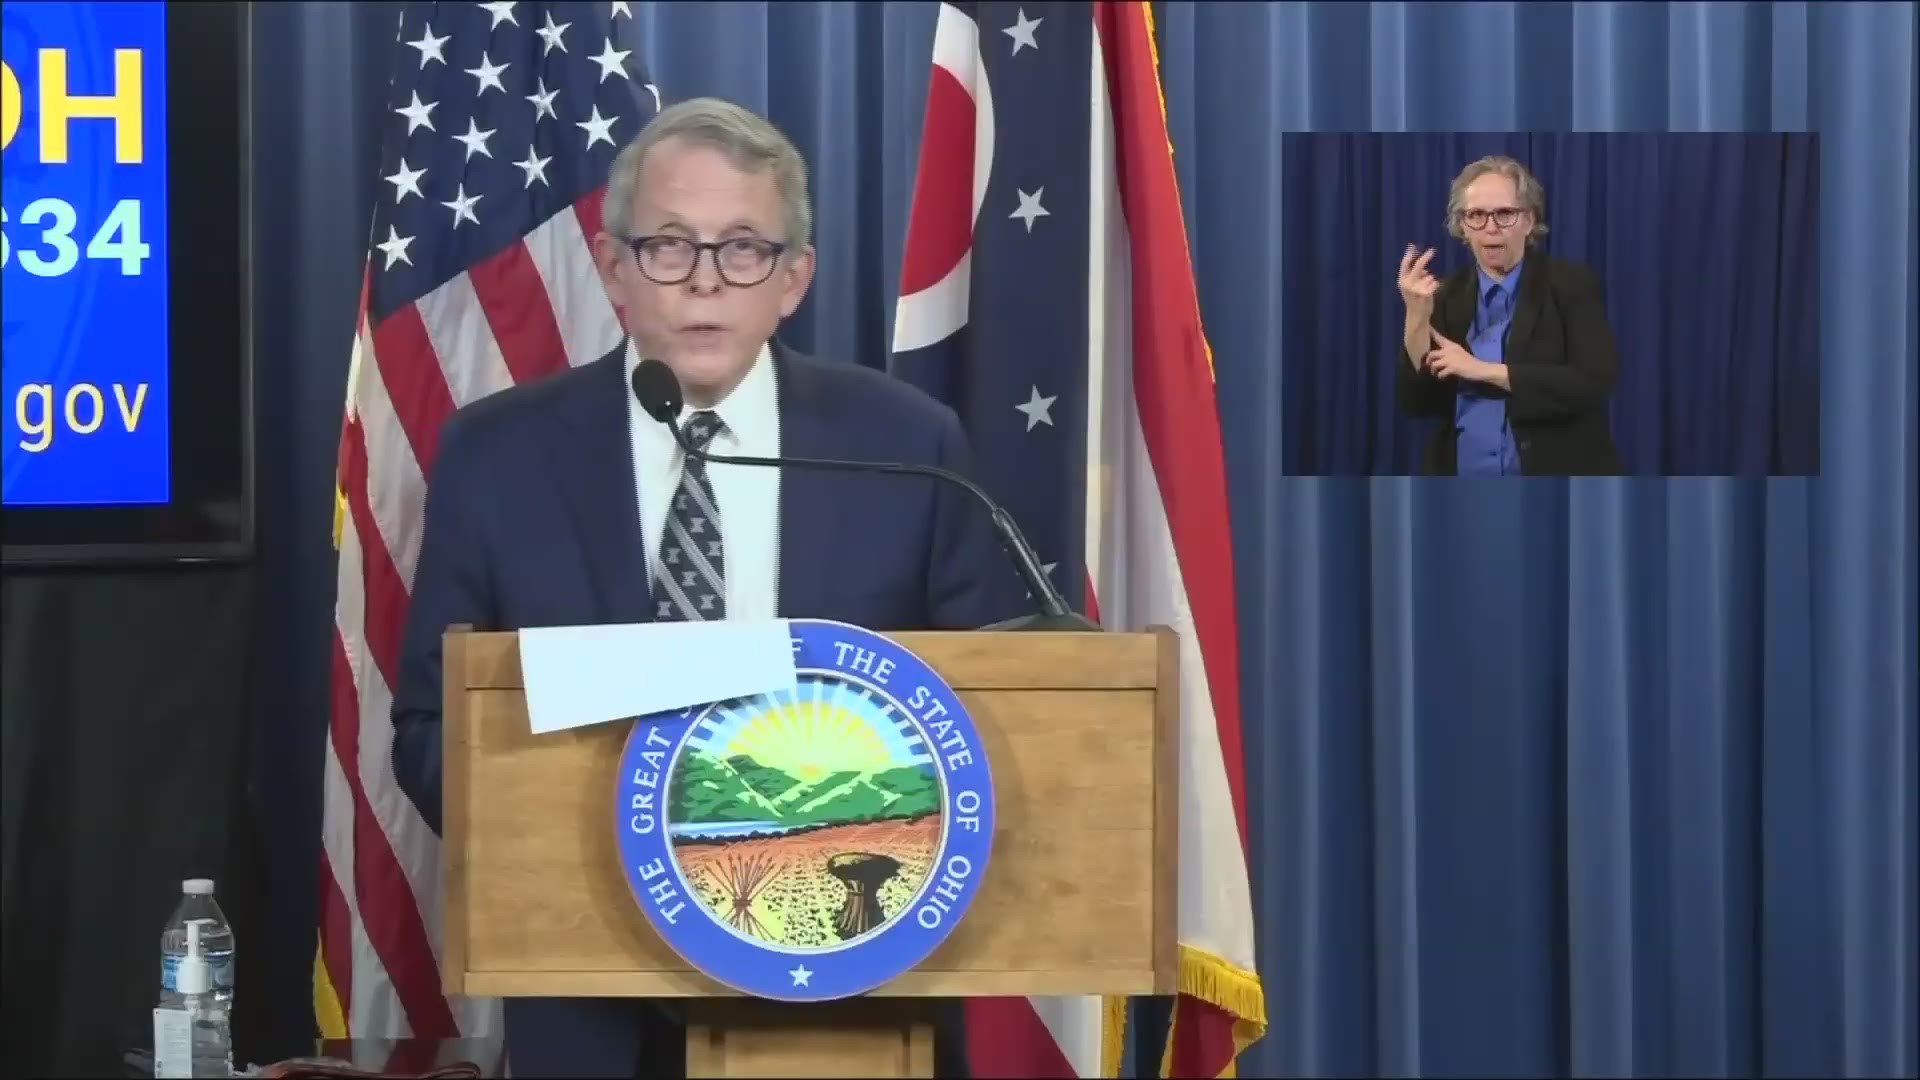 Ohio Governor Mike DeWine announced on Friday that some of the state's retail industries will be allowed to start taking appointments, effective immediately.